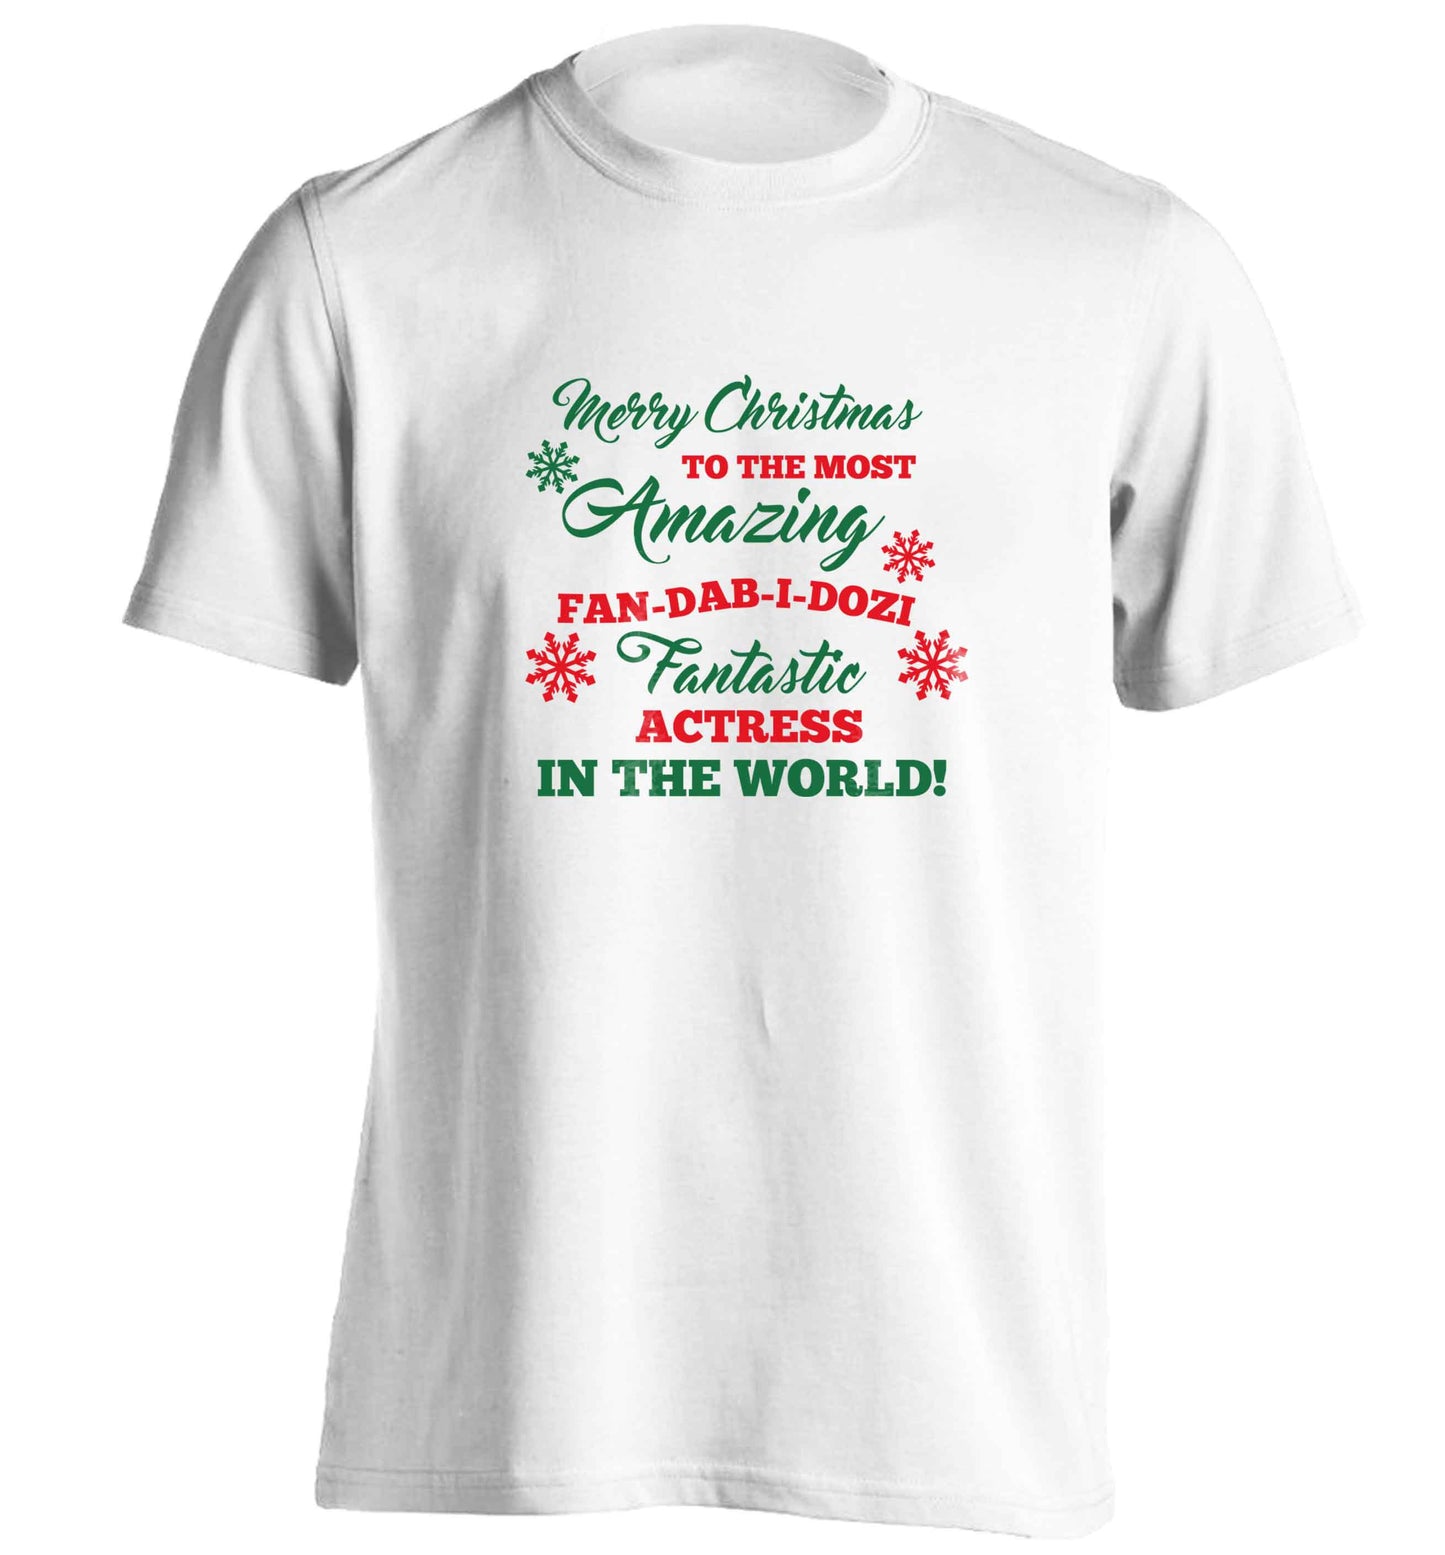 Merry Christmas to the most amazing actress in the world! adults unisex white Tshirt 2XL